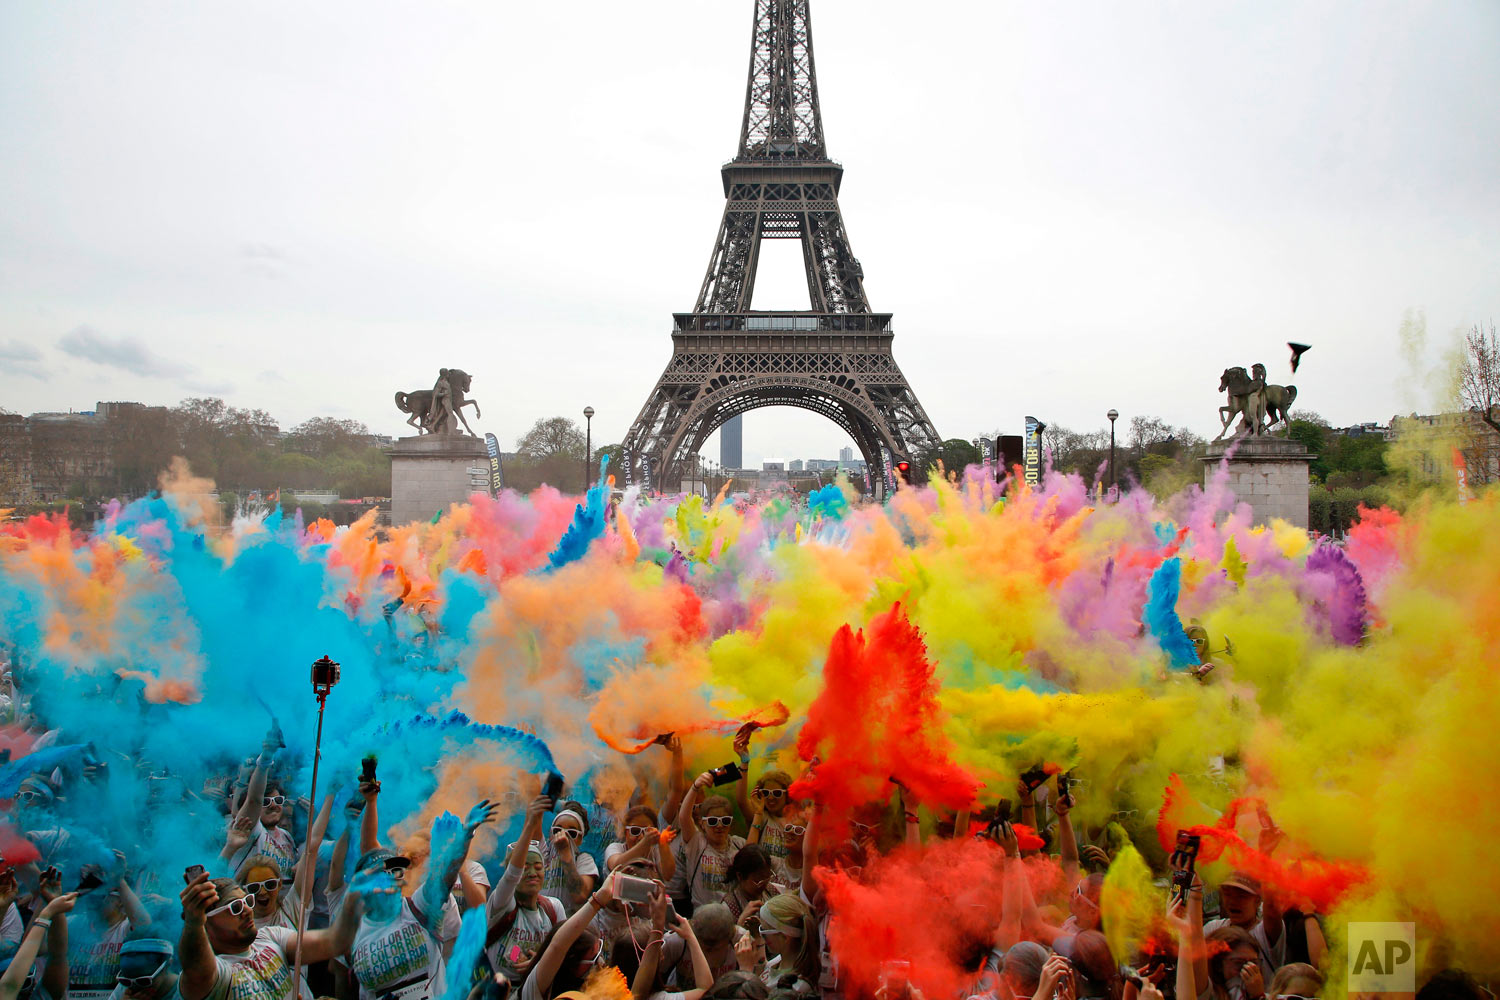  People throw colored powder as they celebrate at the end of the Color Run 2018 race in front of the Eiffel Tower in Paris, Sunday, April 15, 2018. The Color Run is a 5 kilometer (3.1 mile) running event where participants are covered in bright color